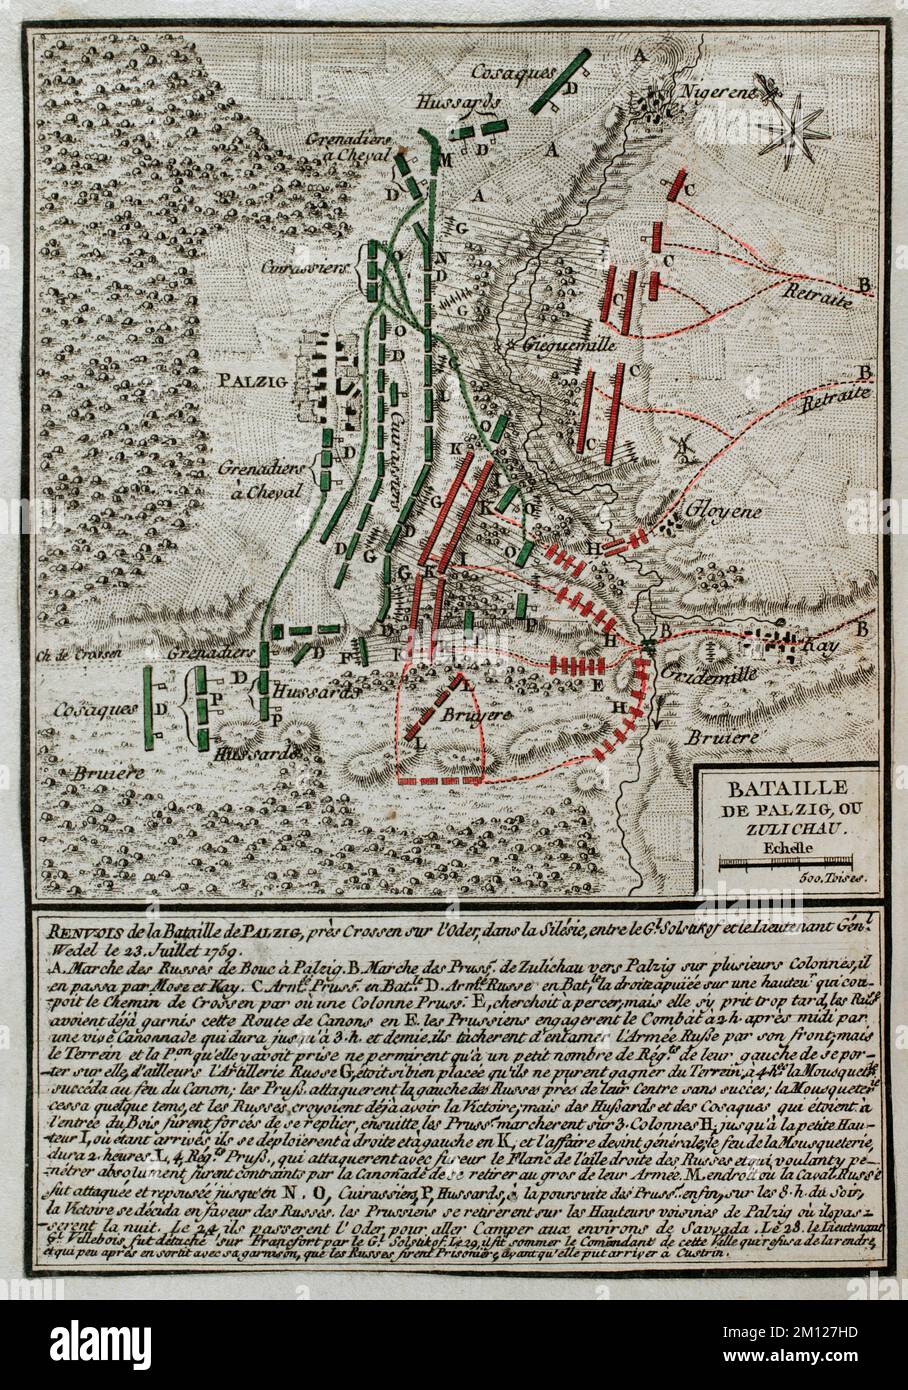 Seven Years War (1756-1763). Map of the Battle of Palzig, also called Battle of Kay (23 July 1759). A Prussian army, led by General Carl Heinrich von Wedel, was defeated by a Russian army under Count Pyotr Saltykov. Published in 1765 by the cartographer Jean de Beaurain (1696-1771) as an illustration of his Great Map of Germany, with the events that took place during the Seven Years War. Etching and engraving. French edition, 1765. Military Historical Library of Barcelona (Biblioteca Histórico Militar de Barcelona). Catalonia. Spain. Stock Photo